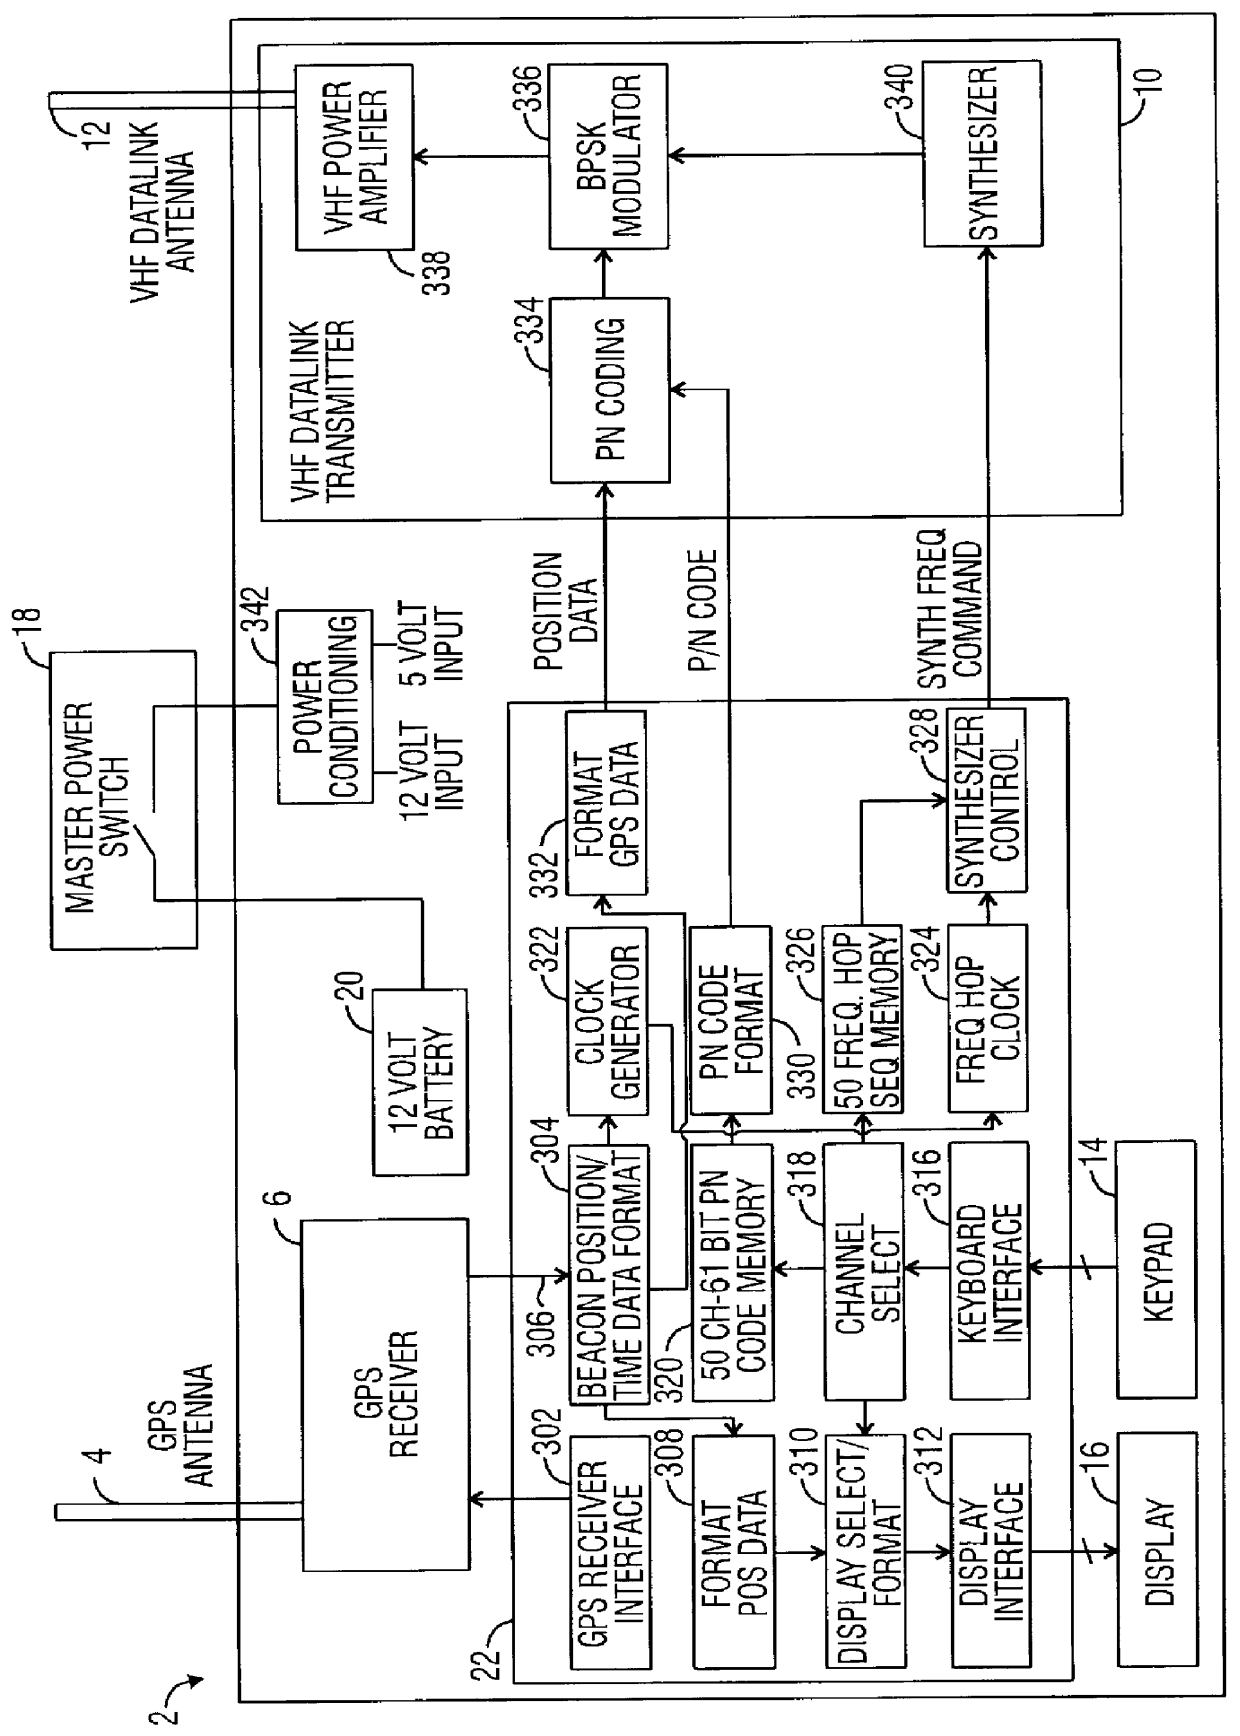 Method and apparatus for global positioning system based cooperative location system